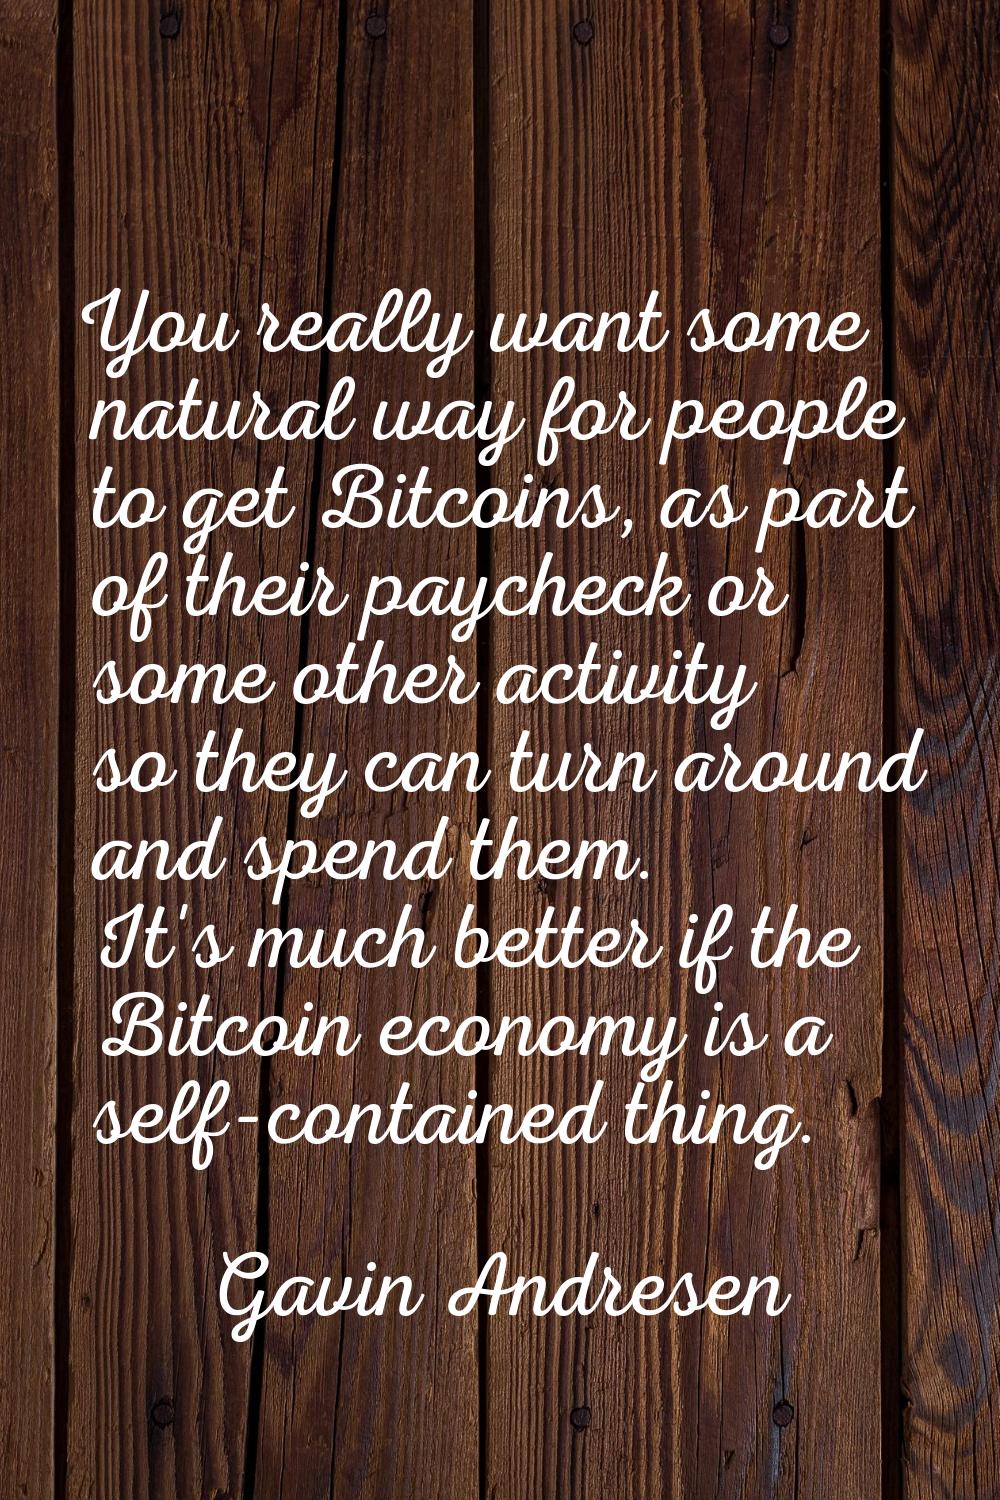 You really want some natural way for people to get Bitcoins, as part of their paycheck or some othe